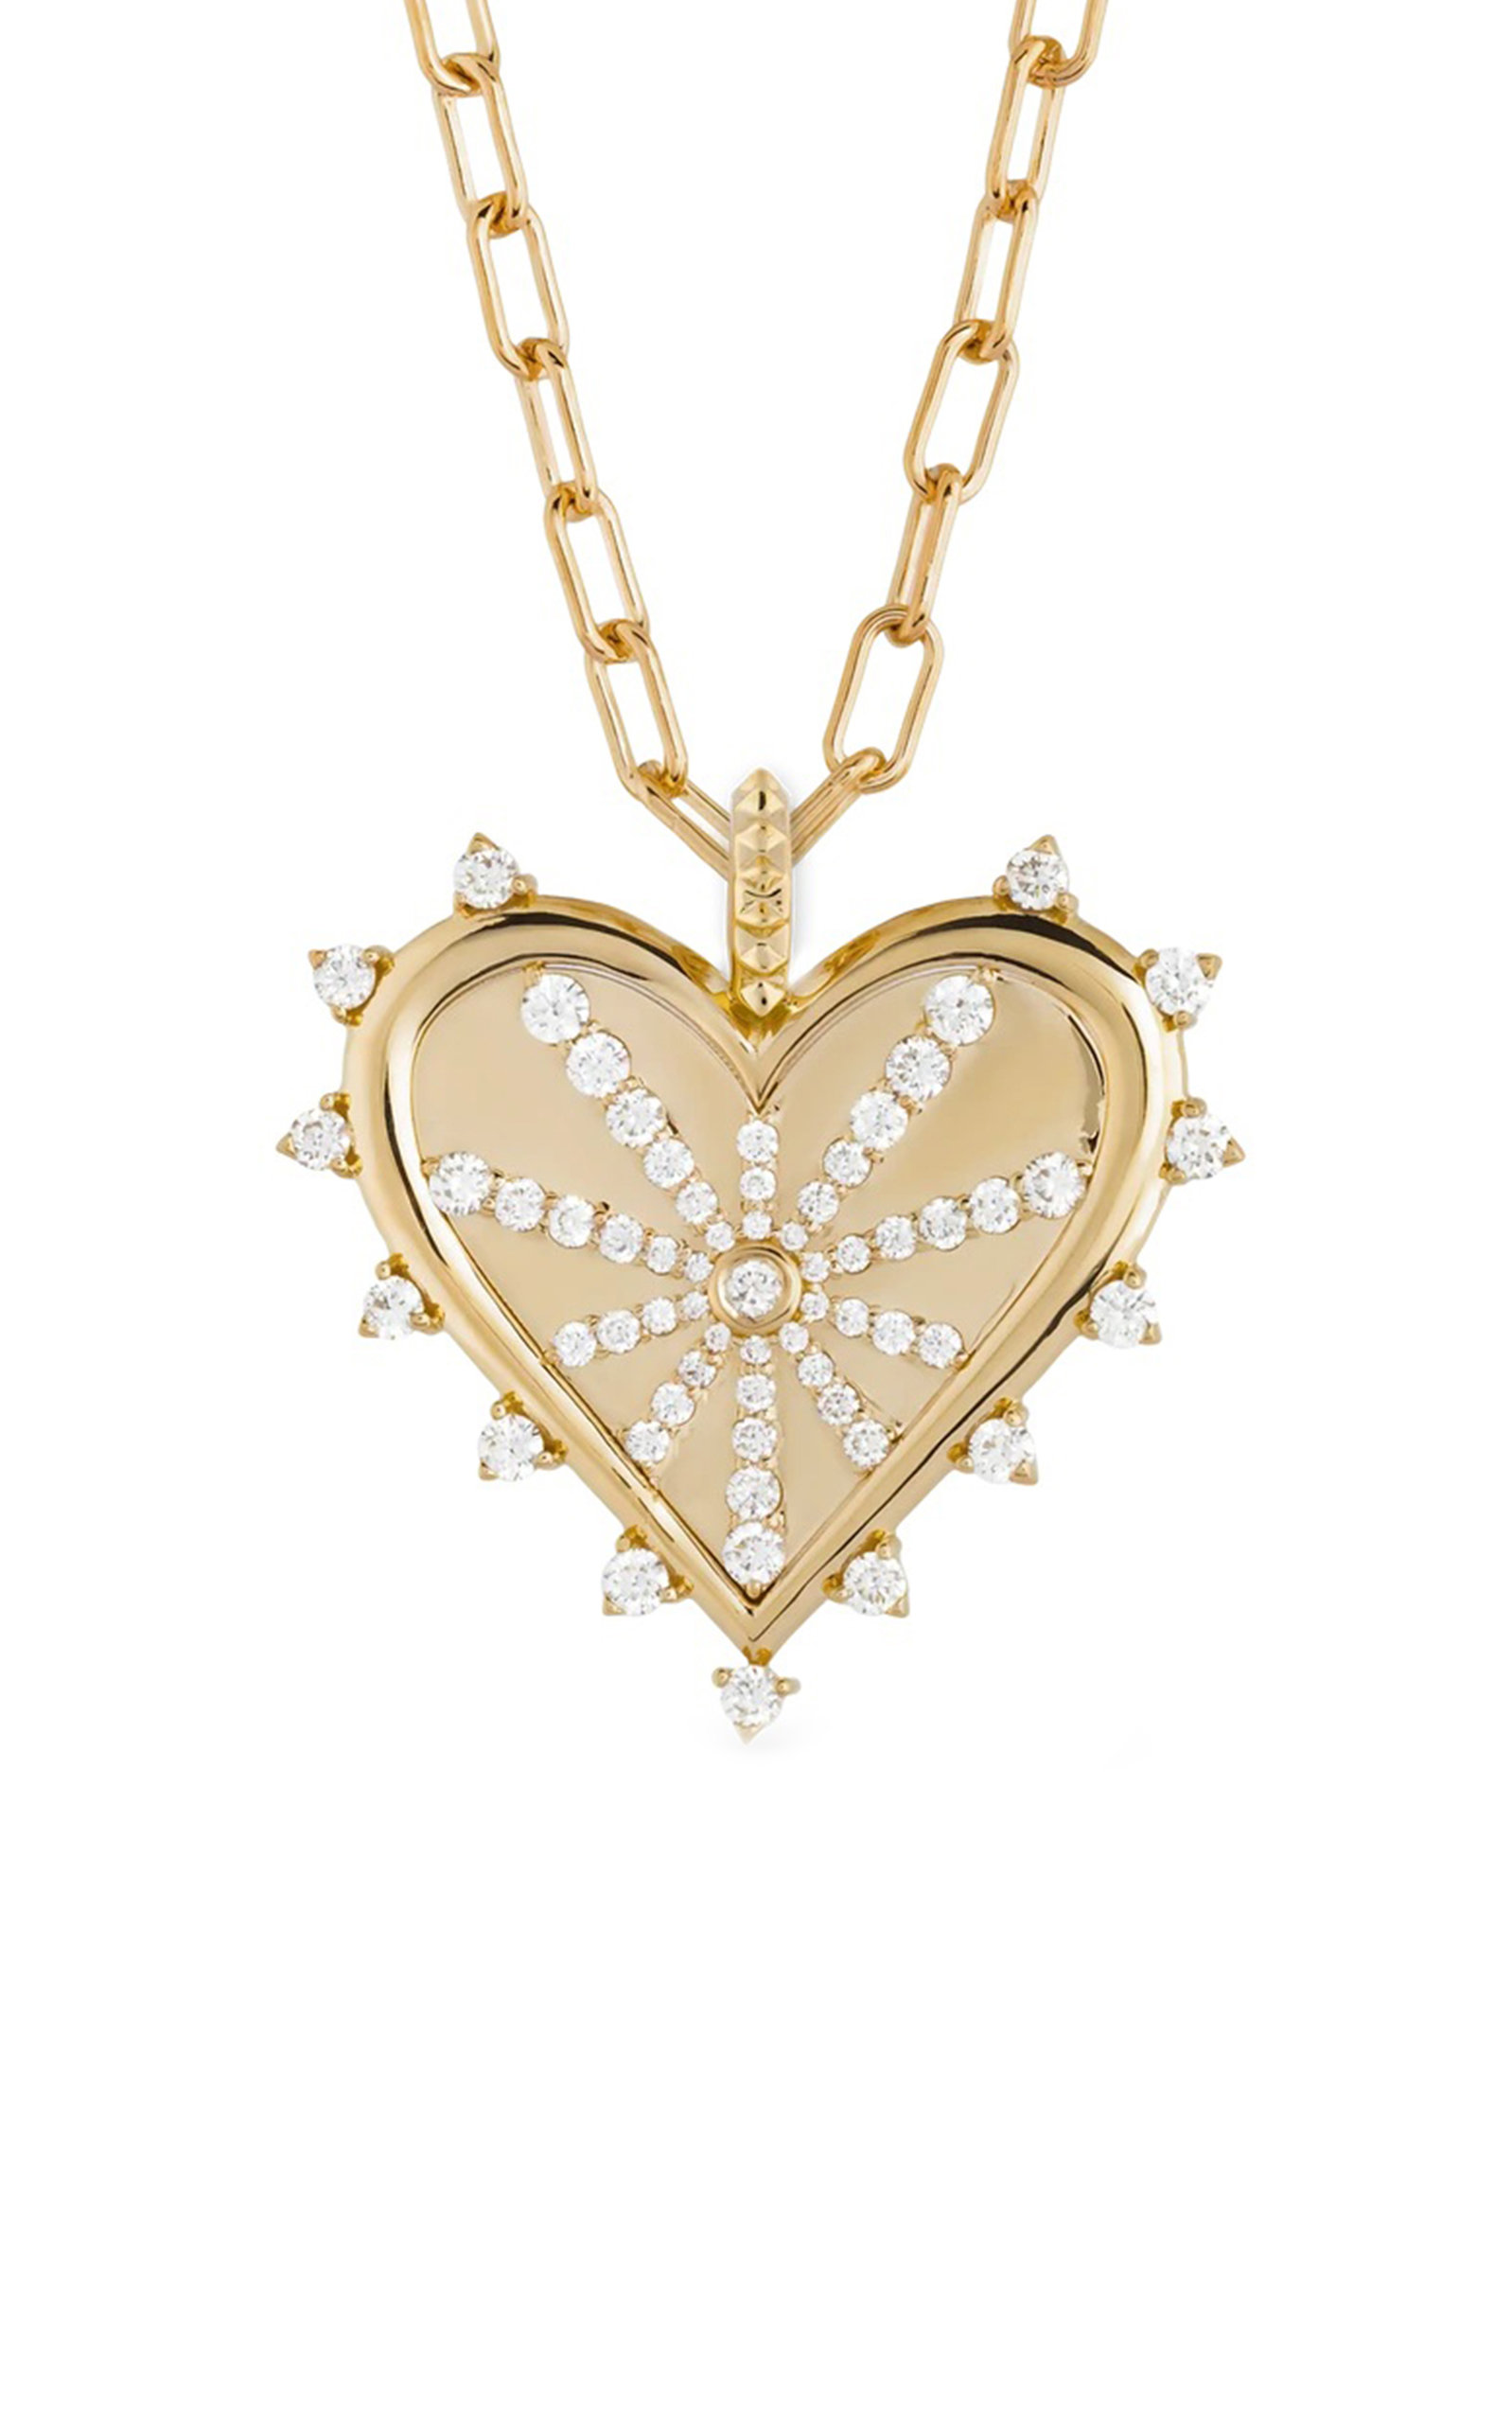 Marlo Laz Spiked Heart 14K Yellow Gold Diamond Coin Necklace